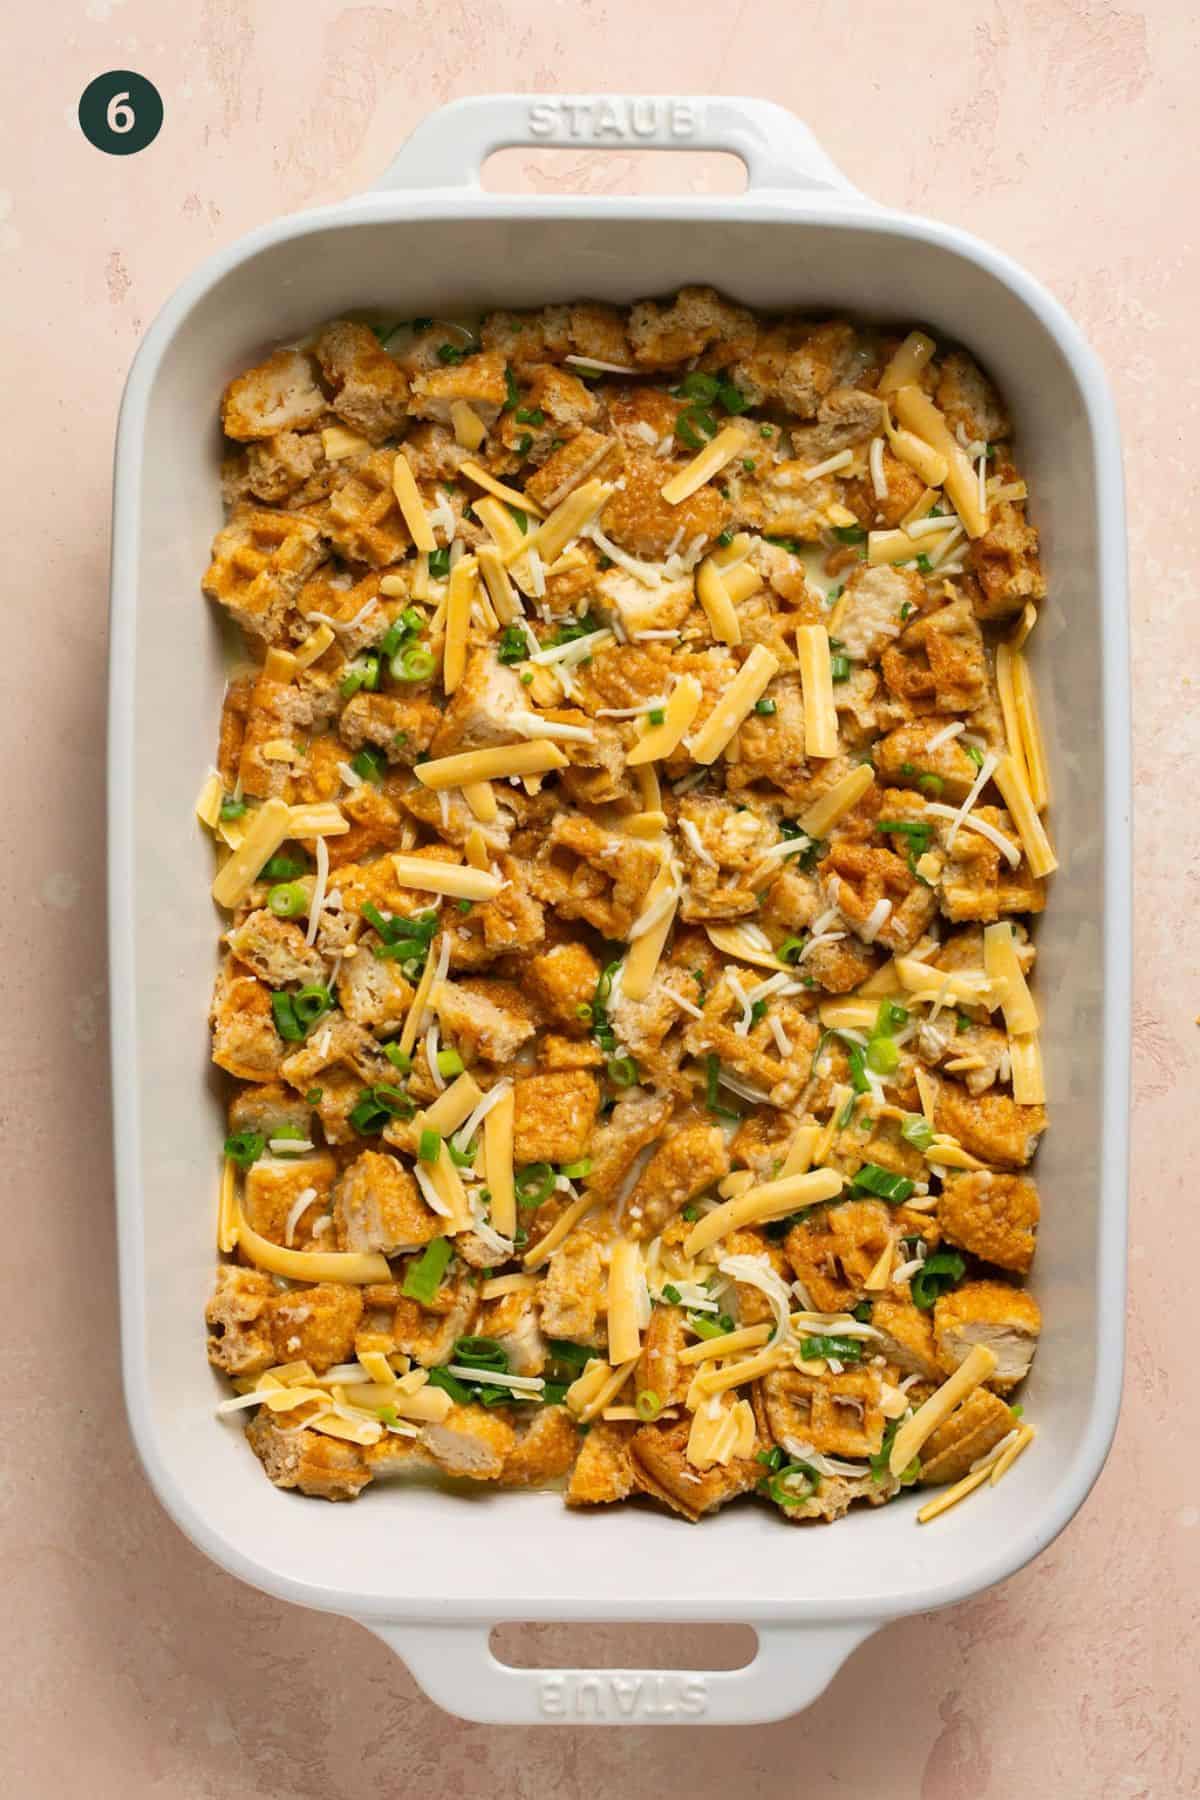 Chicken and waggles chopped covered with egg and cheese mixture in a casserole dish.